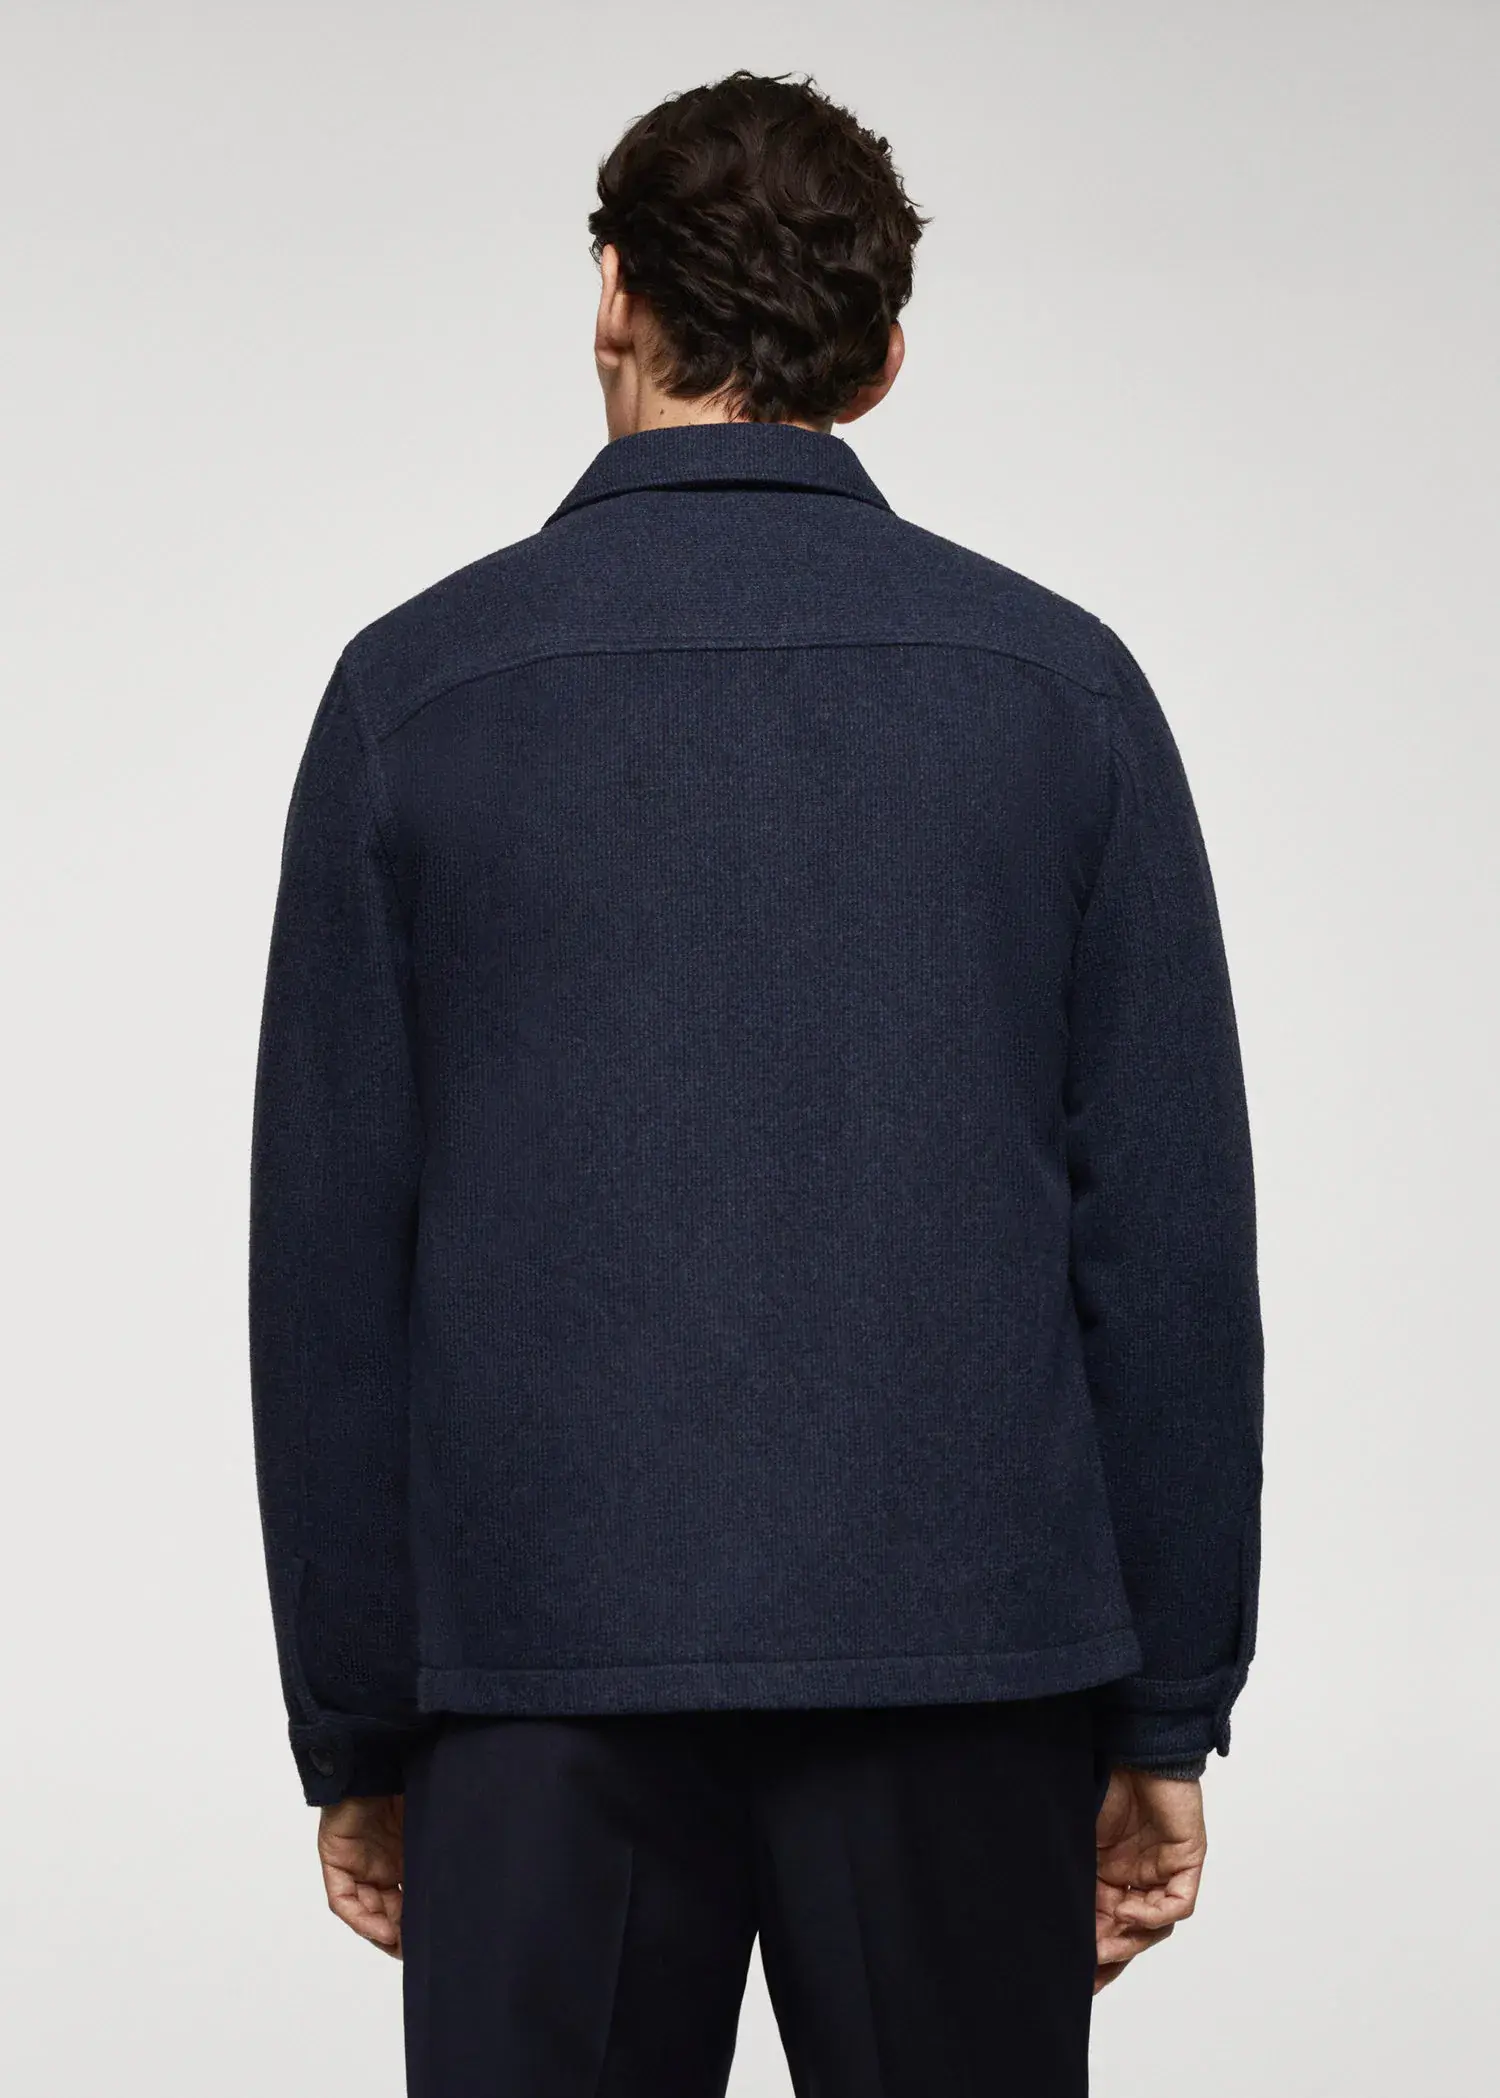 Mango Double-faced wool overshirt with pockets. 3